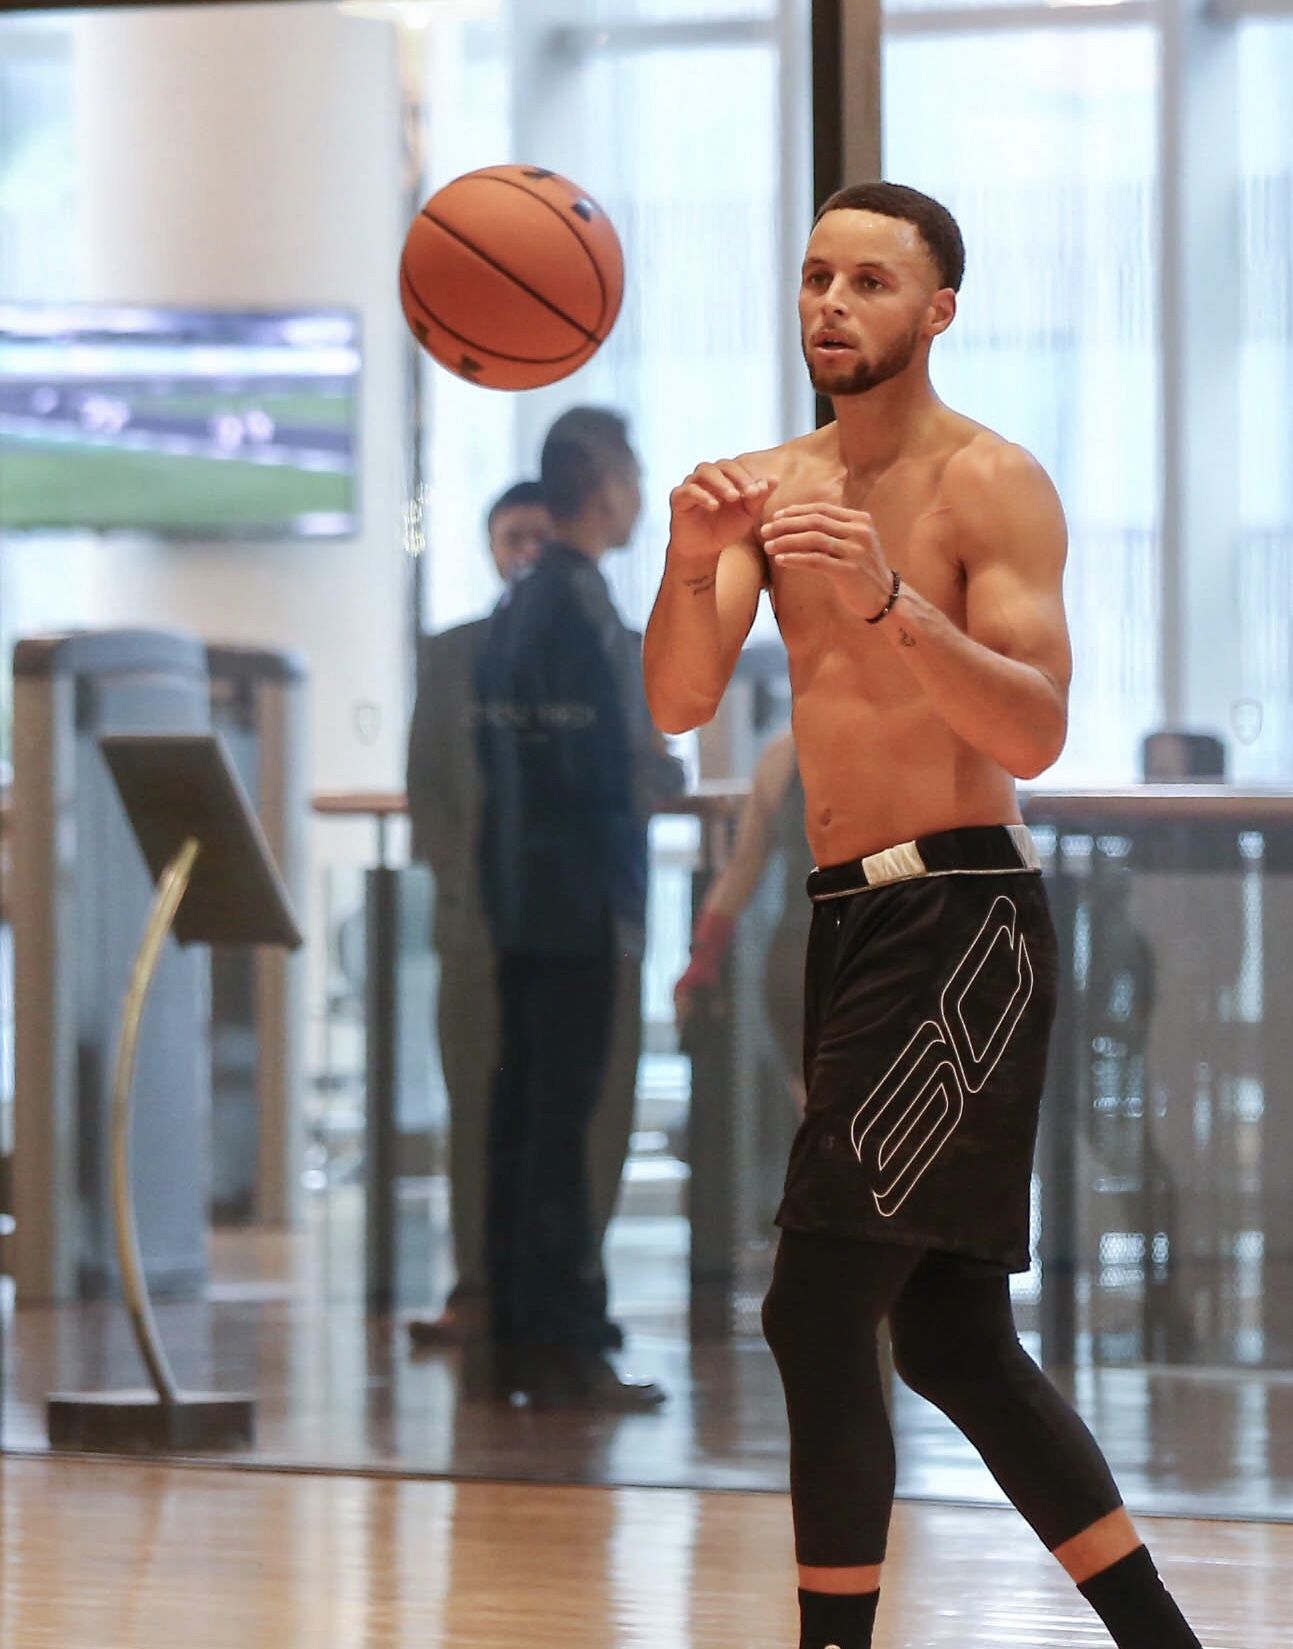 StephenCurry works out in Manila, part of the Asia 2018 Under Armour Tour.  | Stephen curry workout, Stephen curry basketball, Stephen curry